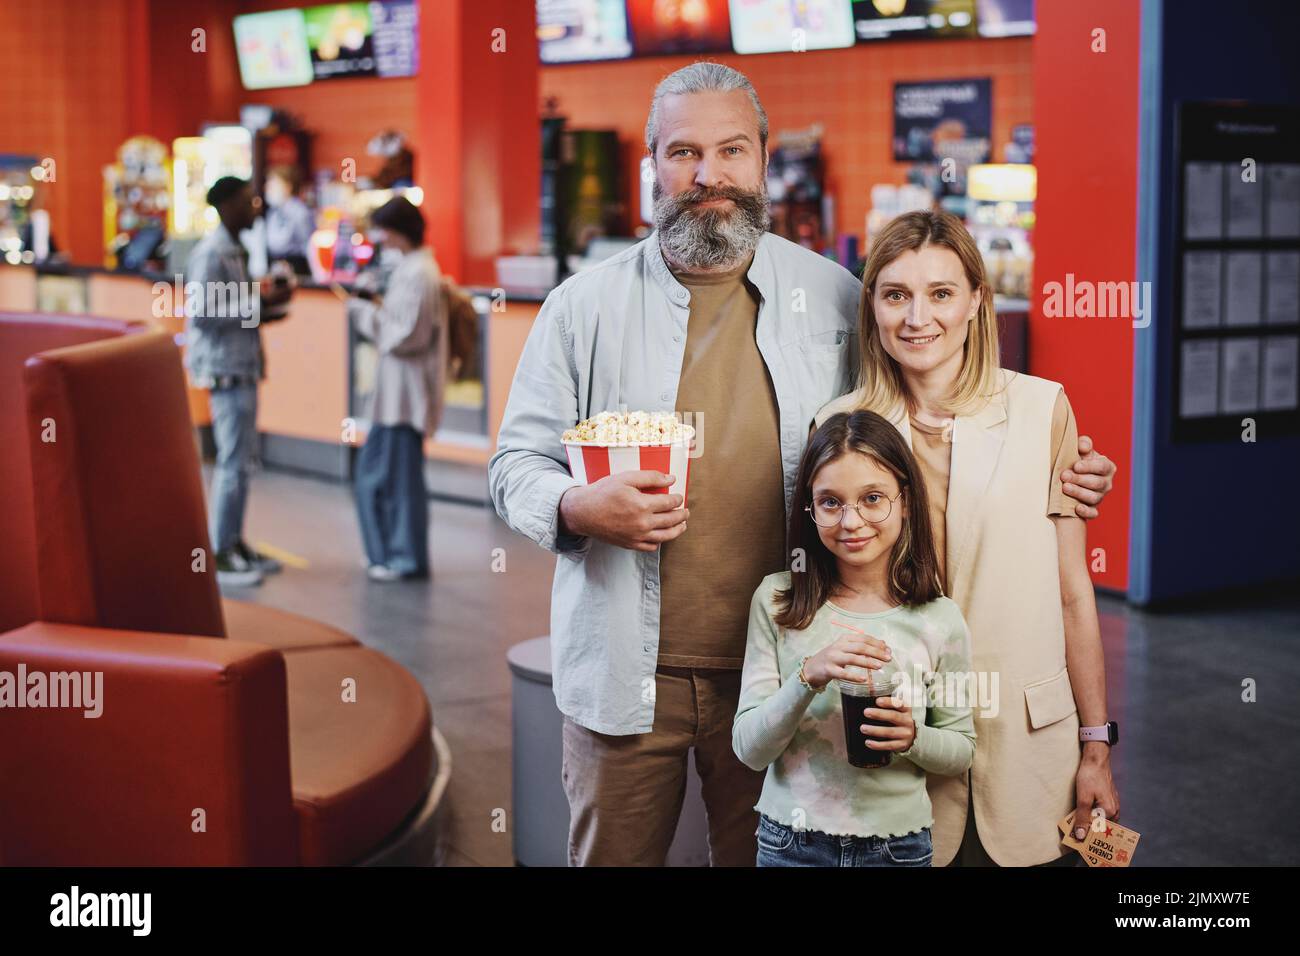 Portrait of modern family with kid holding bucket of popcorn, fizzy drink and tickets for movie looking at camera Stock Photo